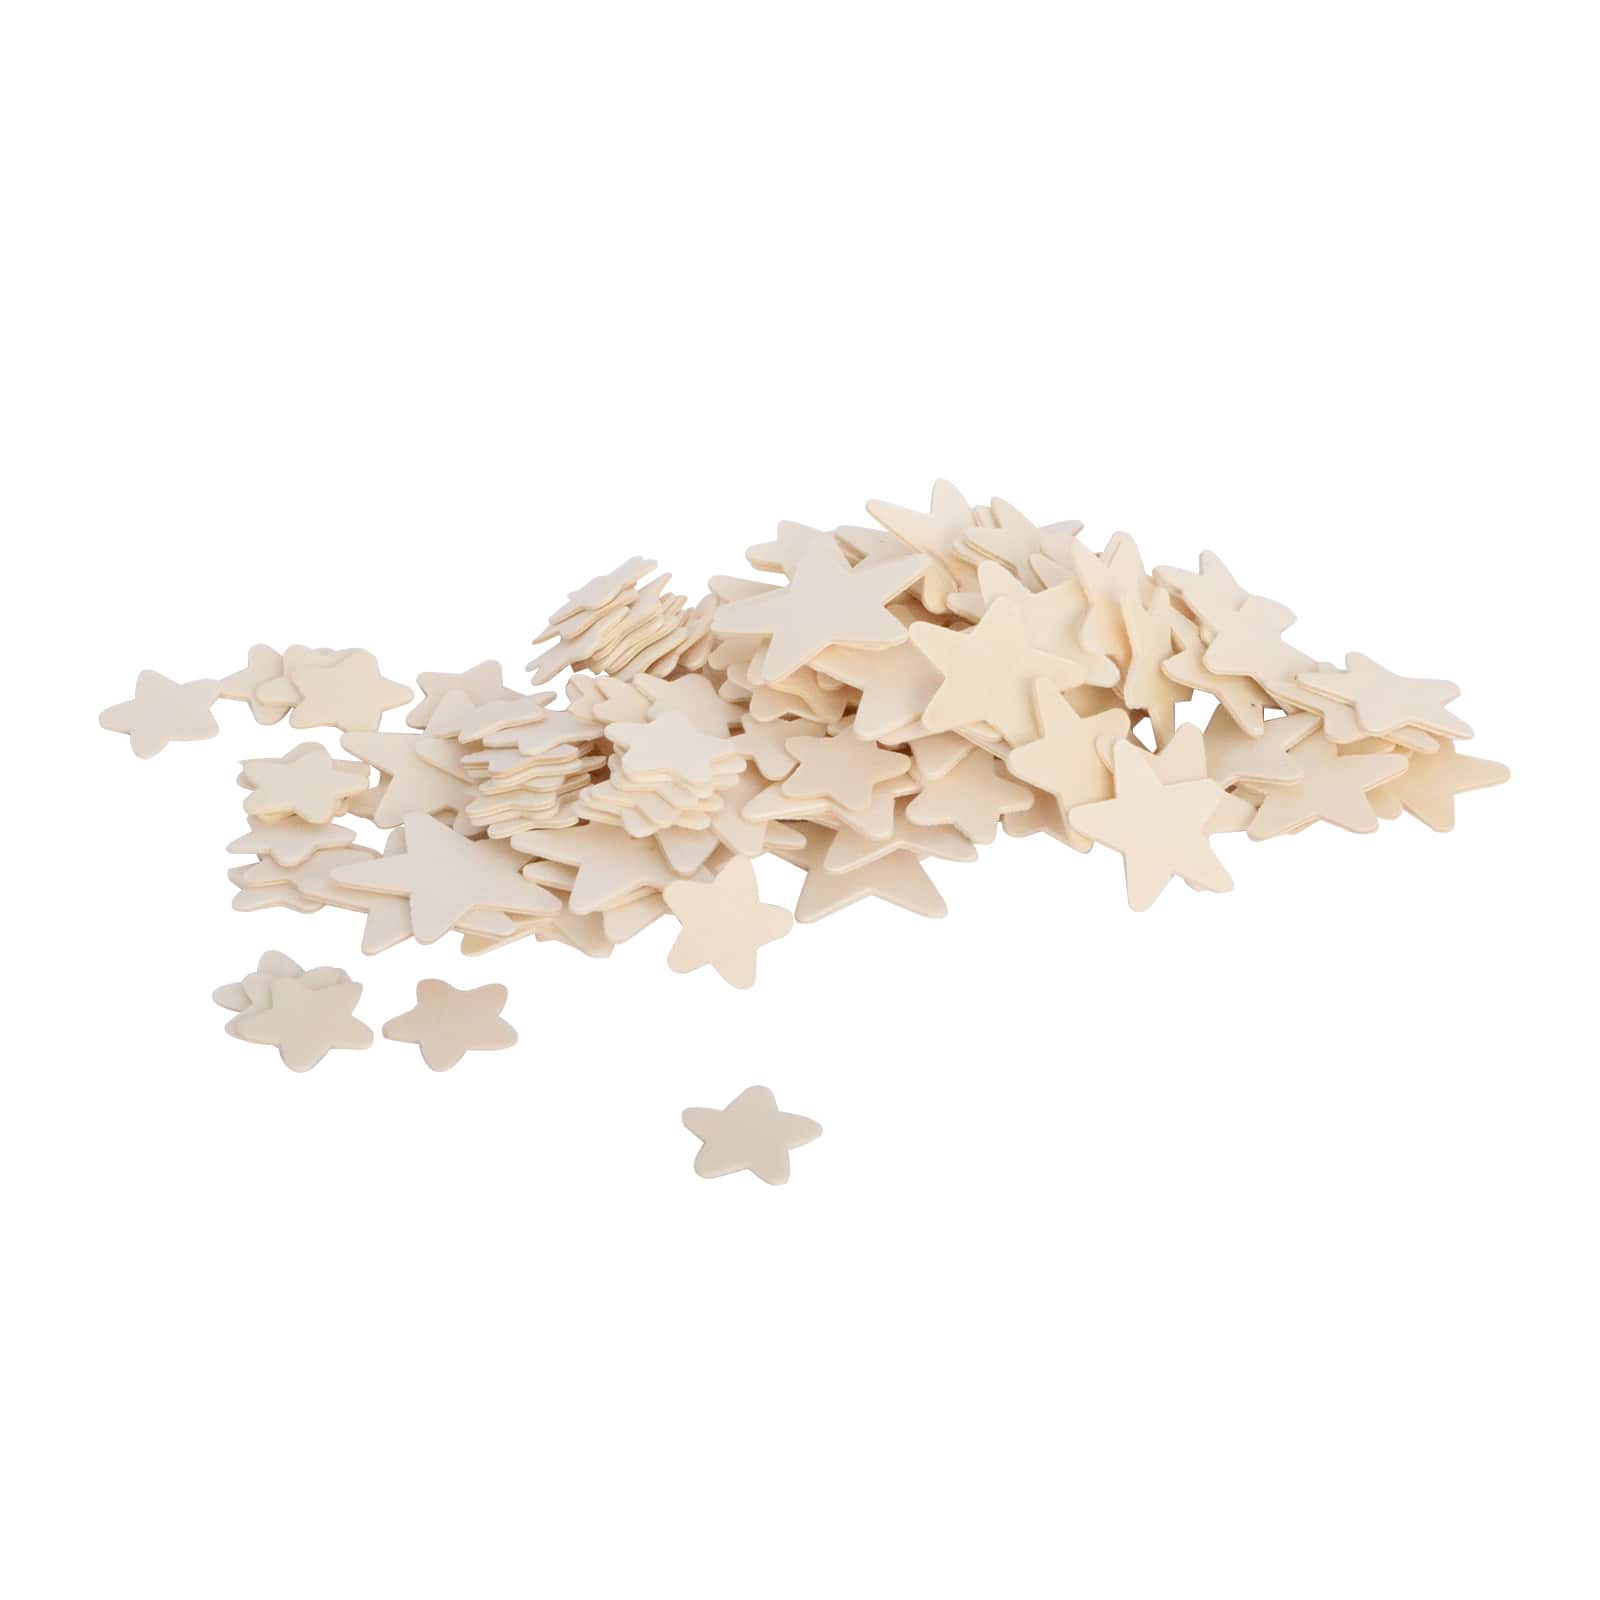 50 Small 1 inch Size Wood Stars